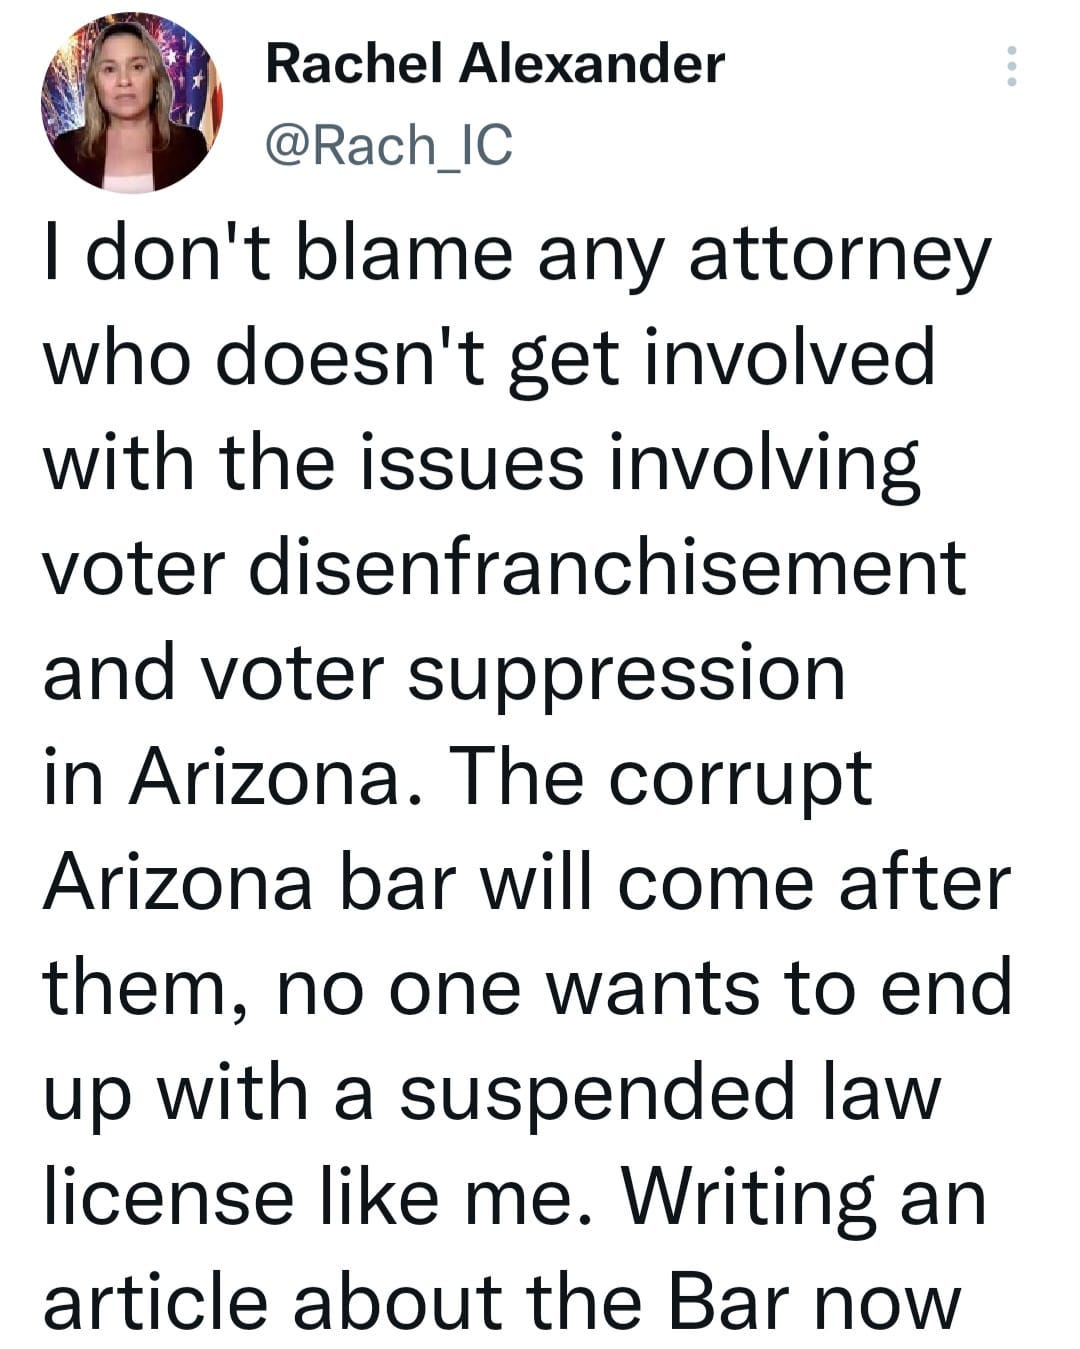 May be a Twitter screenshot of 1 person and text that says 'Rachel Alexander @Rach_IC I don't blame any attorney who doesn't get involved with the issues involving voter disenfranchisement and voter suppression in Arizona. The corrupt Arizona bar will come after them, no one wants to end up with a suspended law license like me. Writing an article about the Bar now'